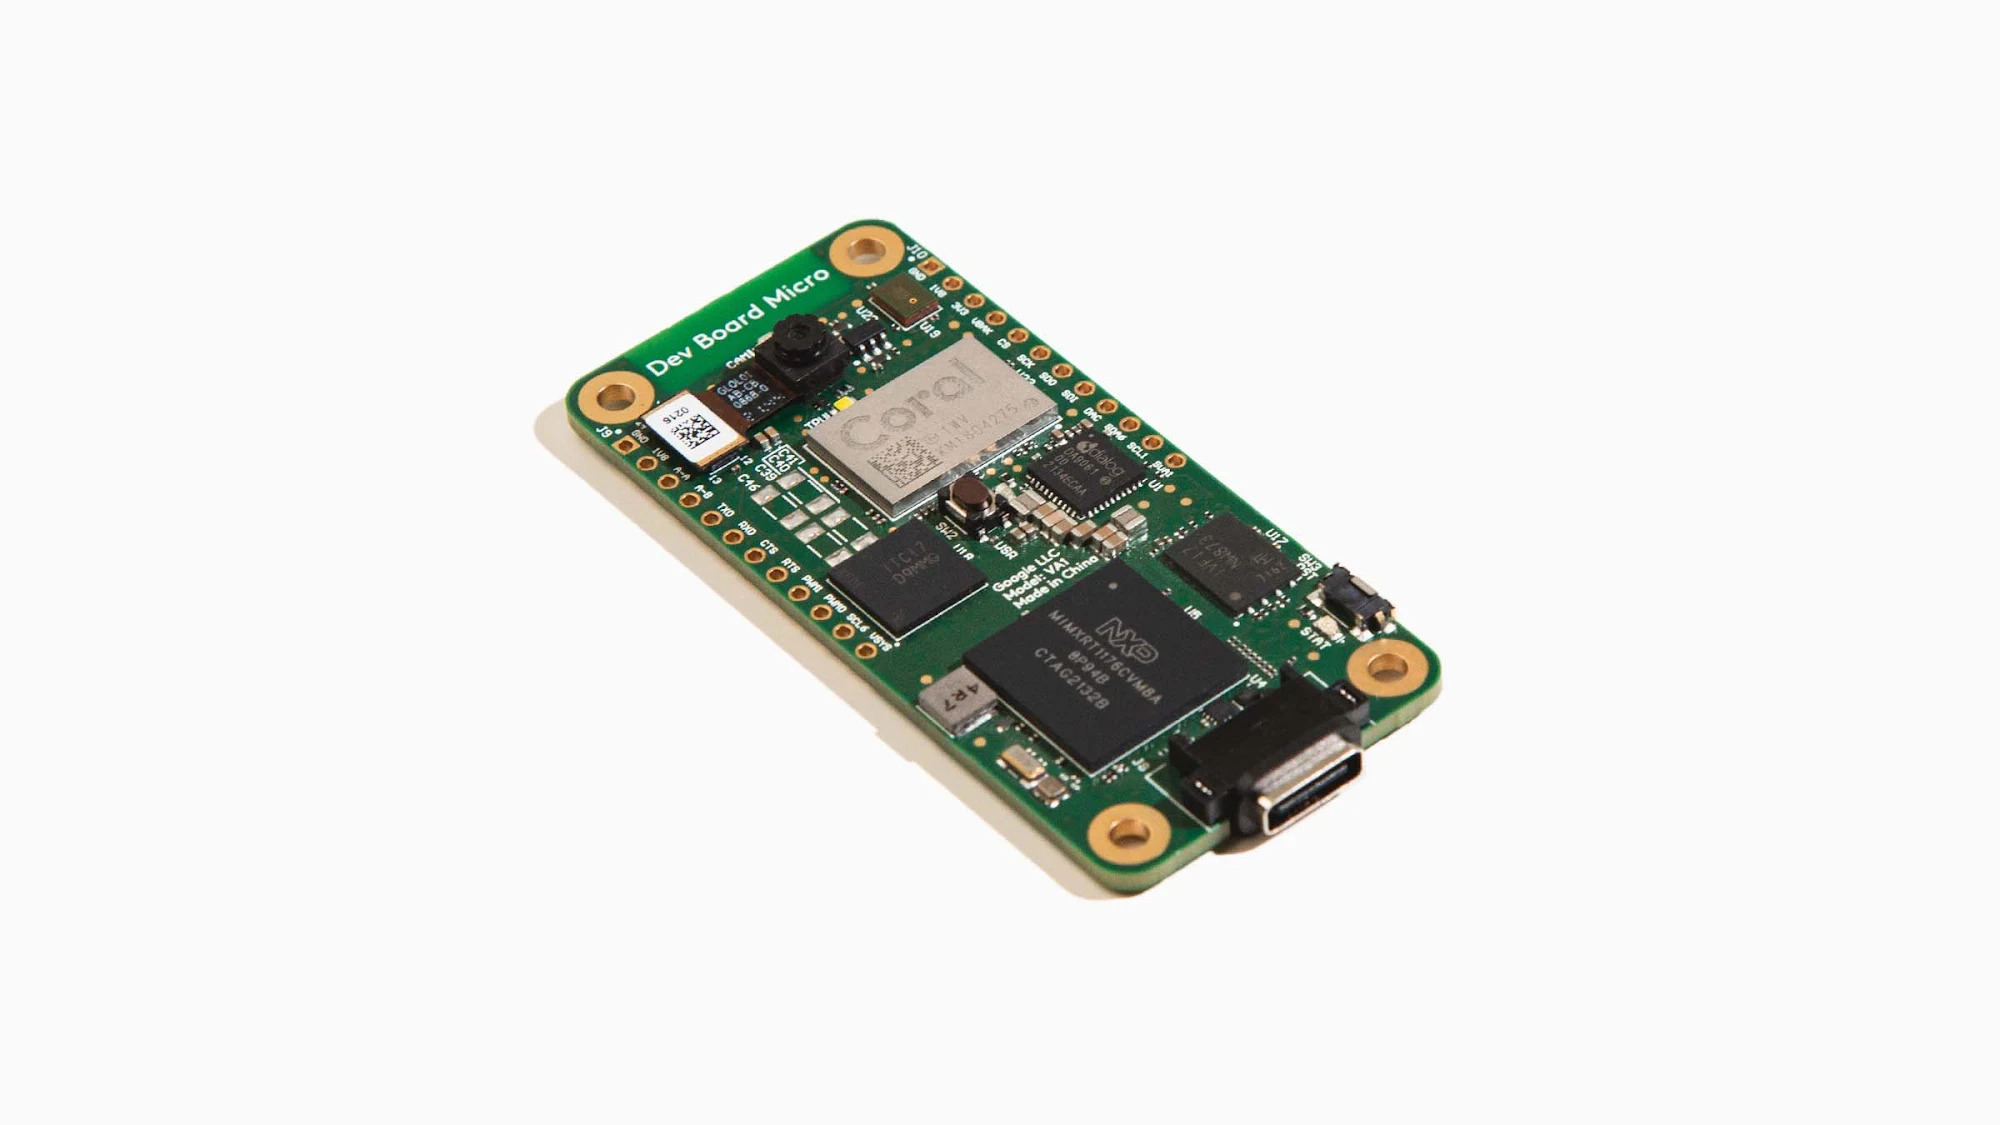 Google Coral Dev Board Micro Enables Computing in Small Form Factor